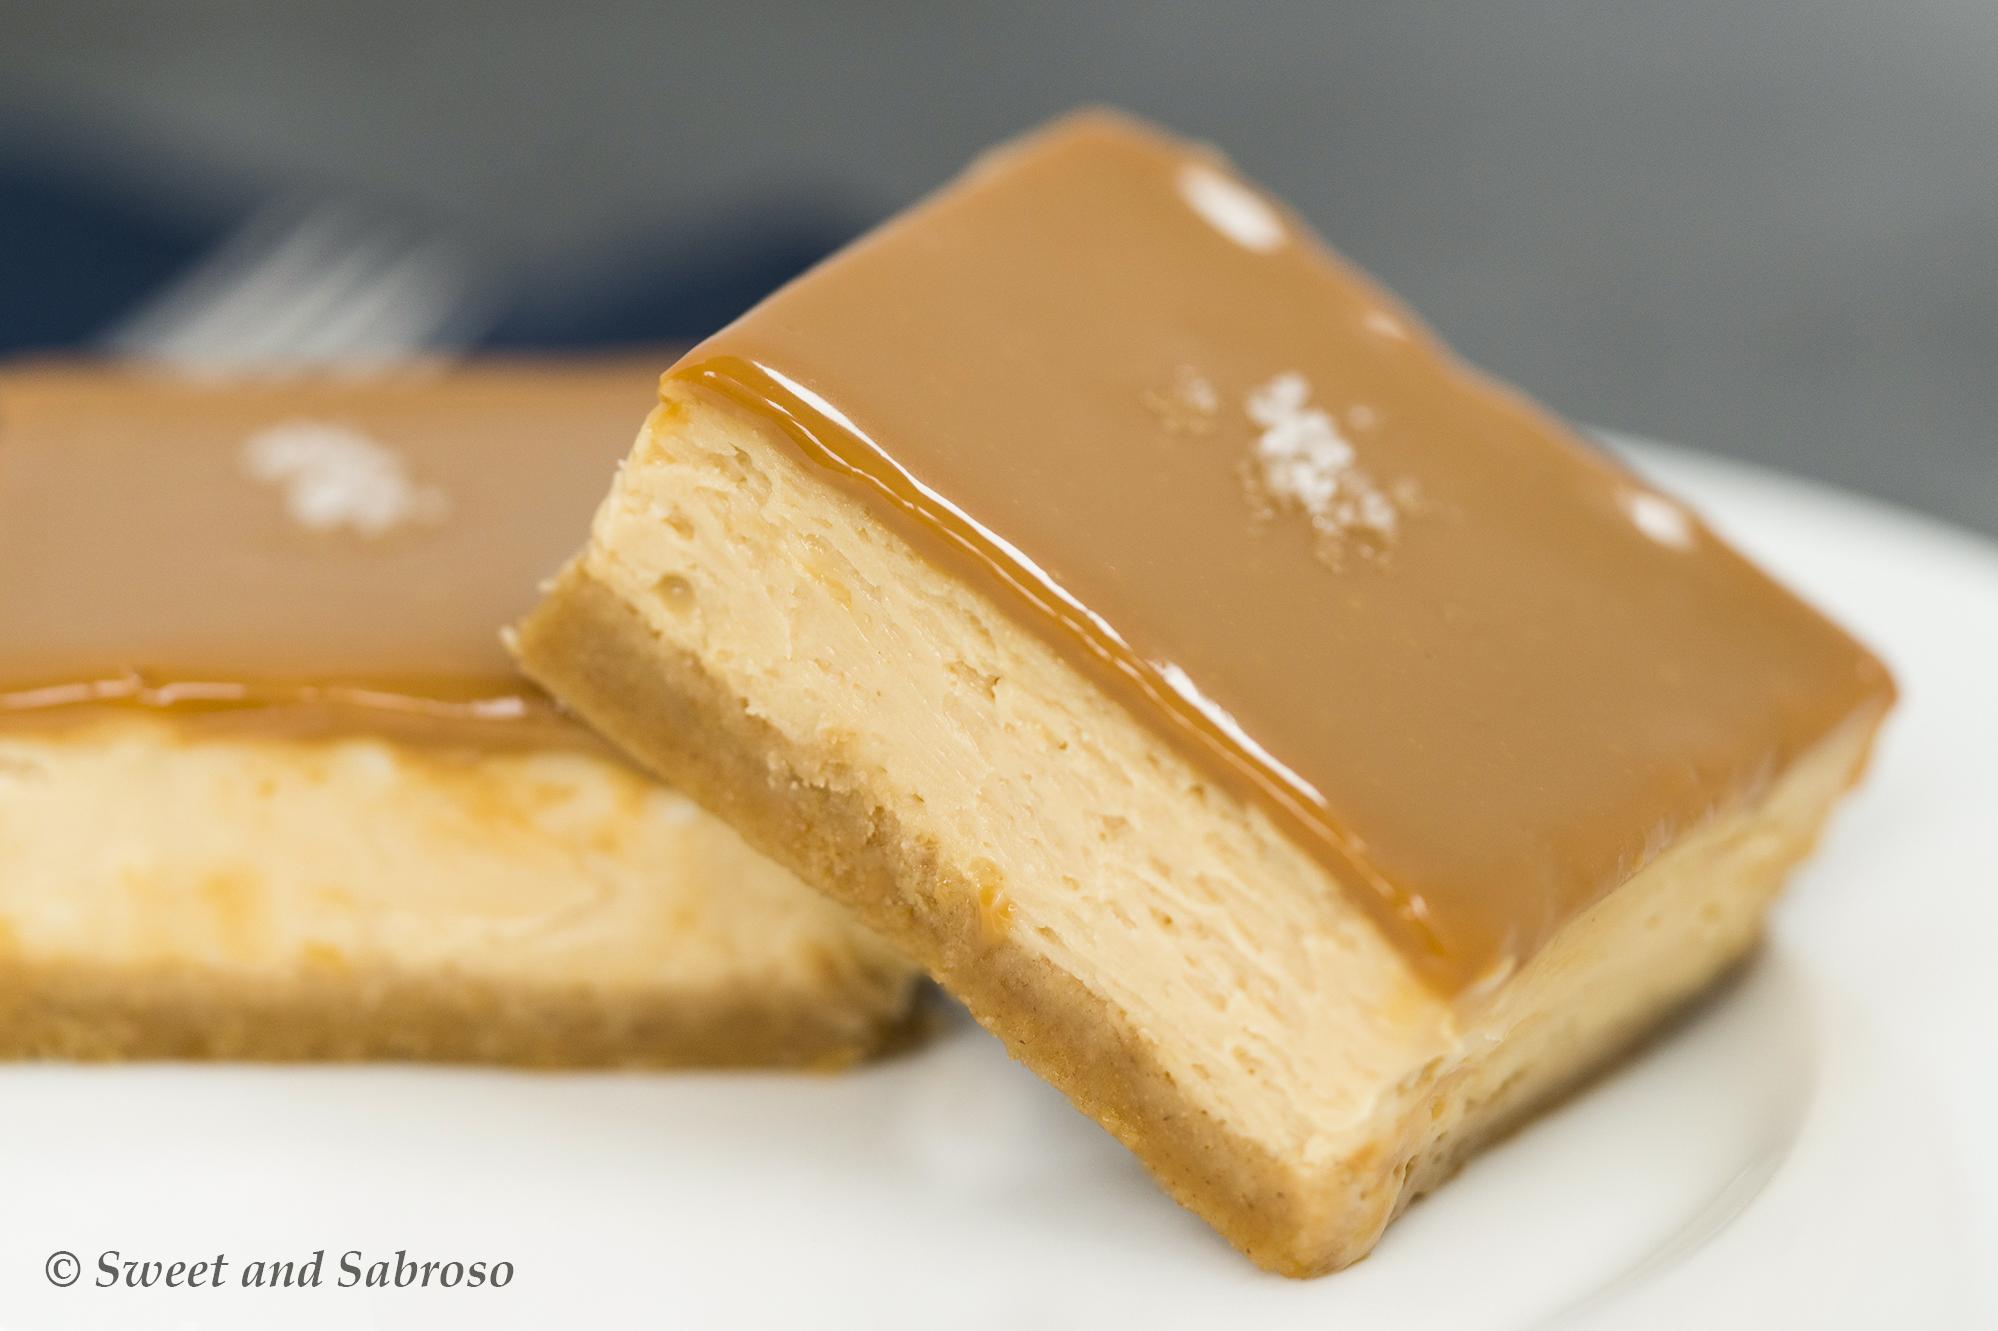  Layers of creamy dulce de leche goodness await you in every slice! 🤤